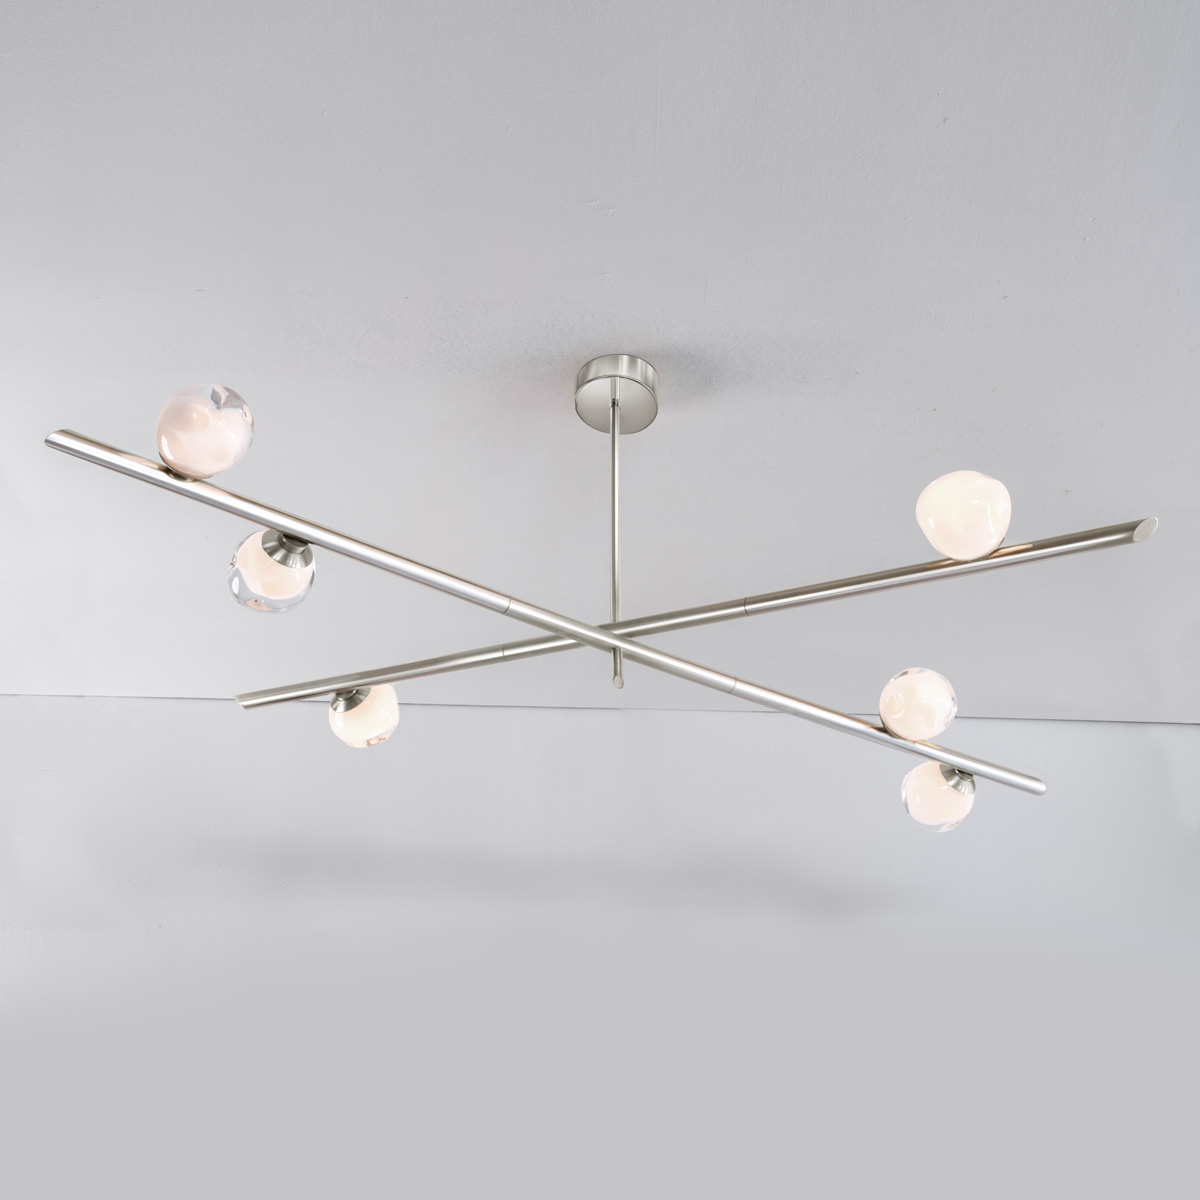 Antares X2 ceiling light by gaspare asaro